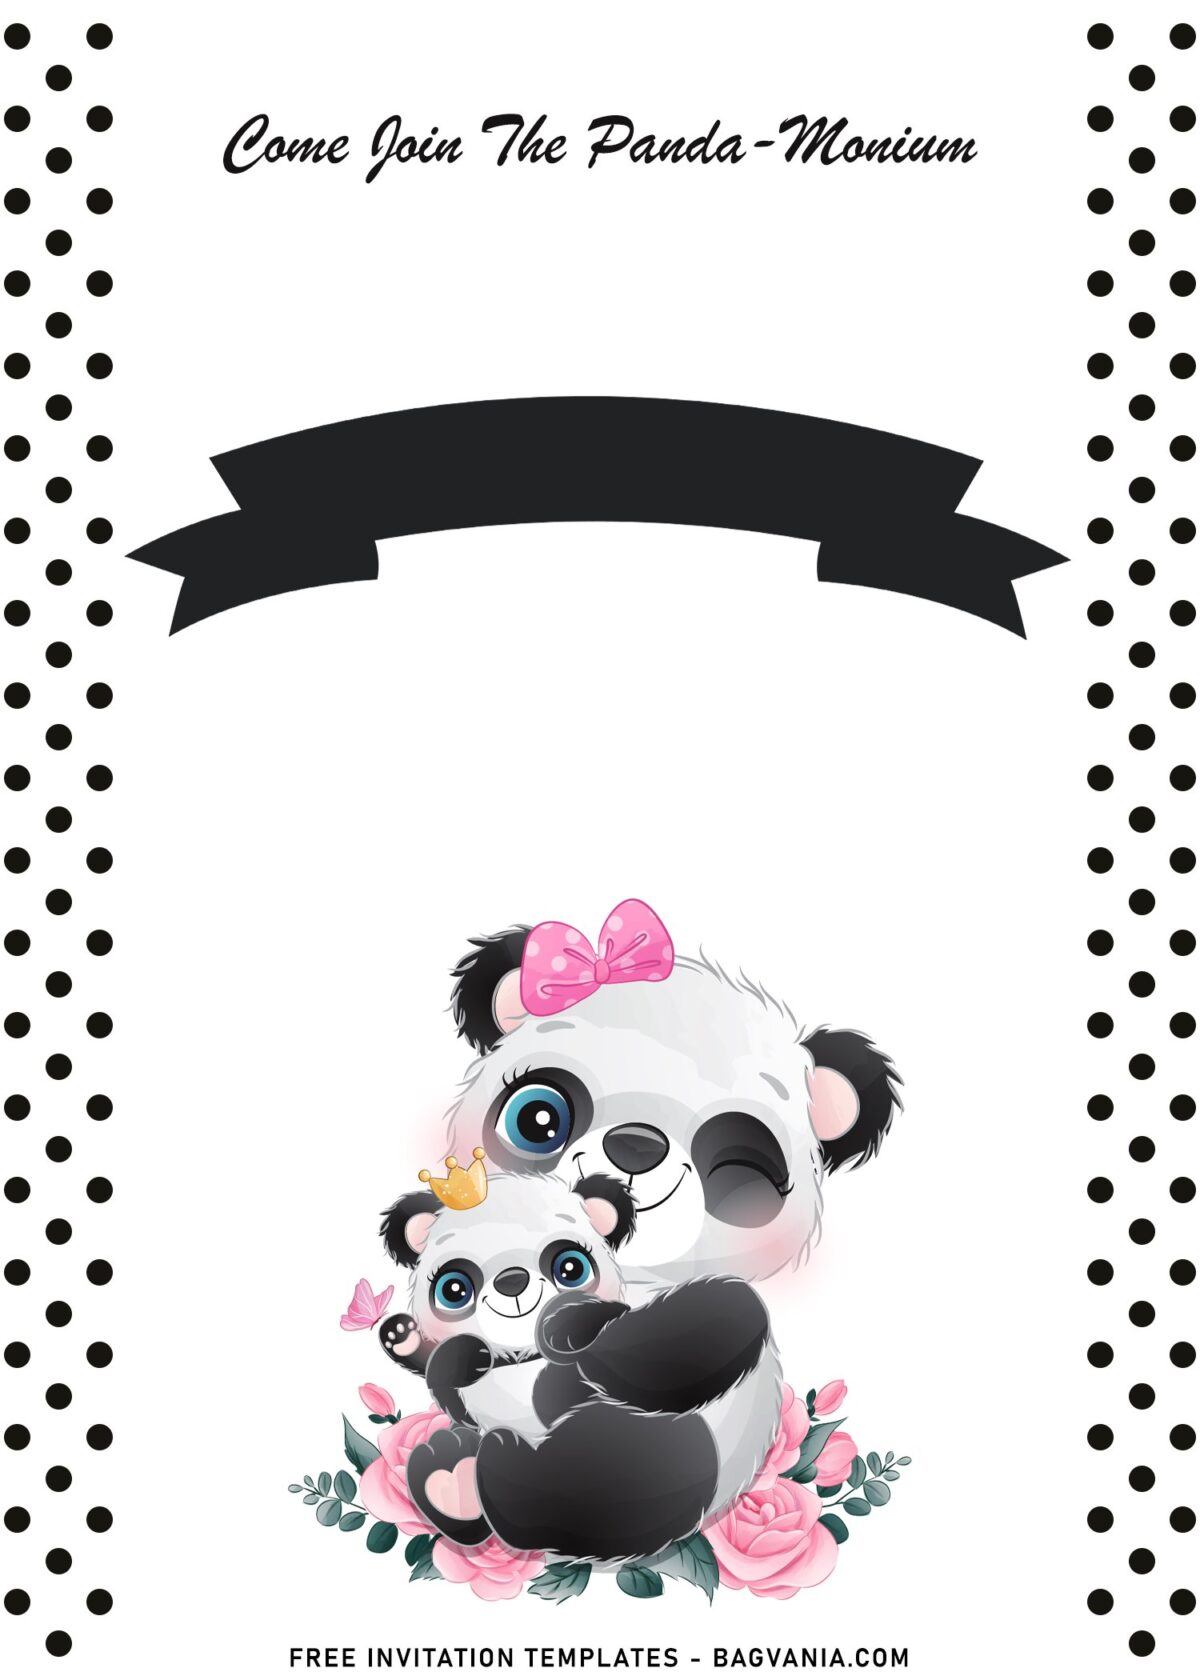 11+ Fluffy Panda Birthday Invitation Templates For Your Kid's Birthday with mommy panda and her baby